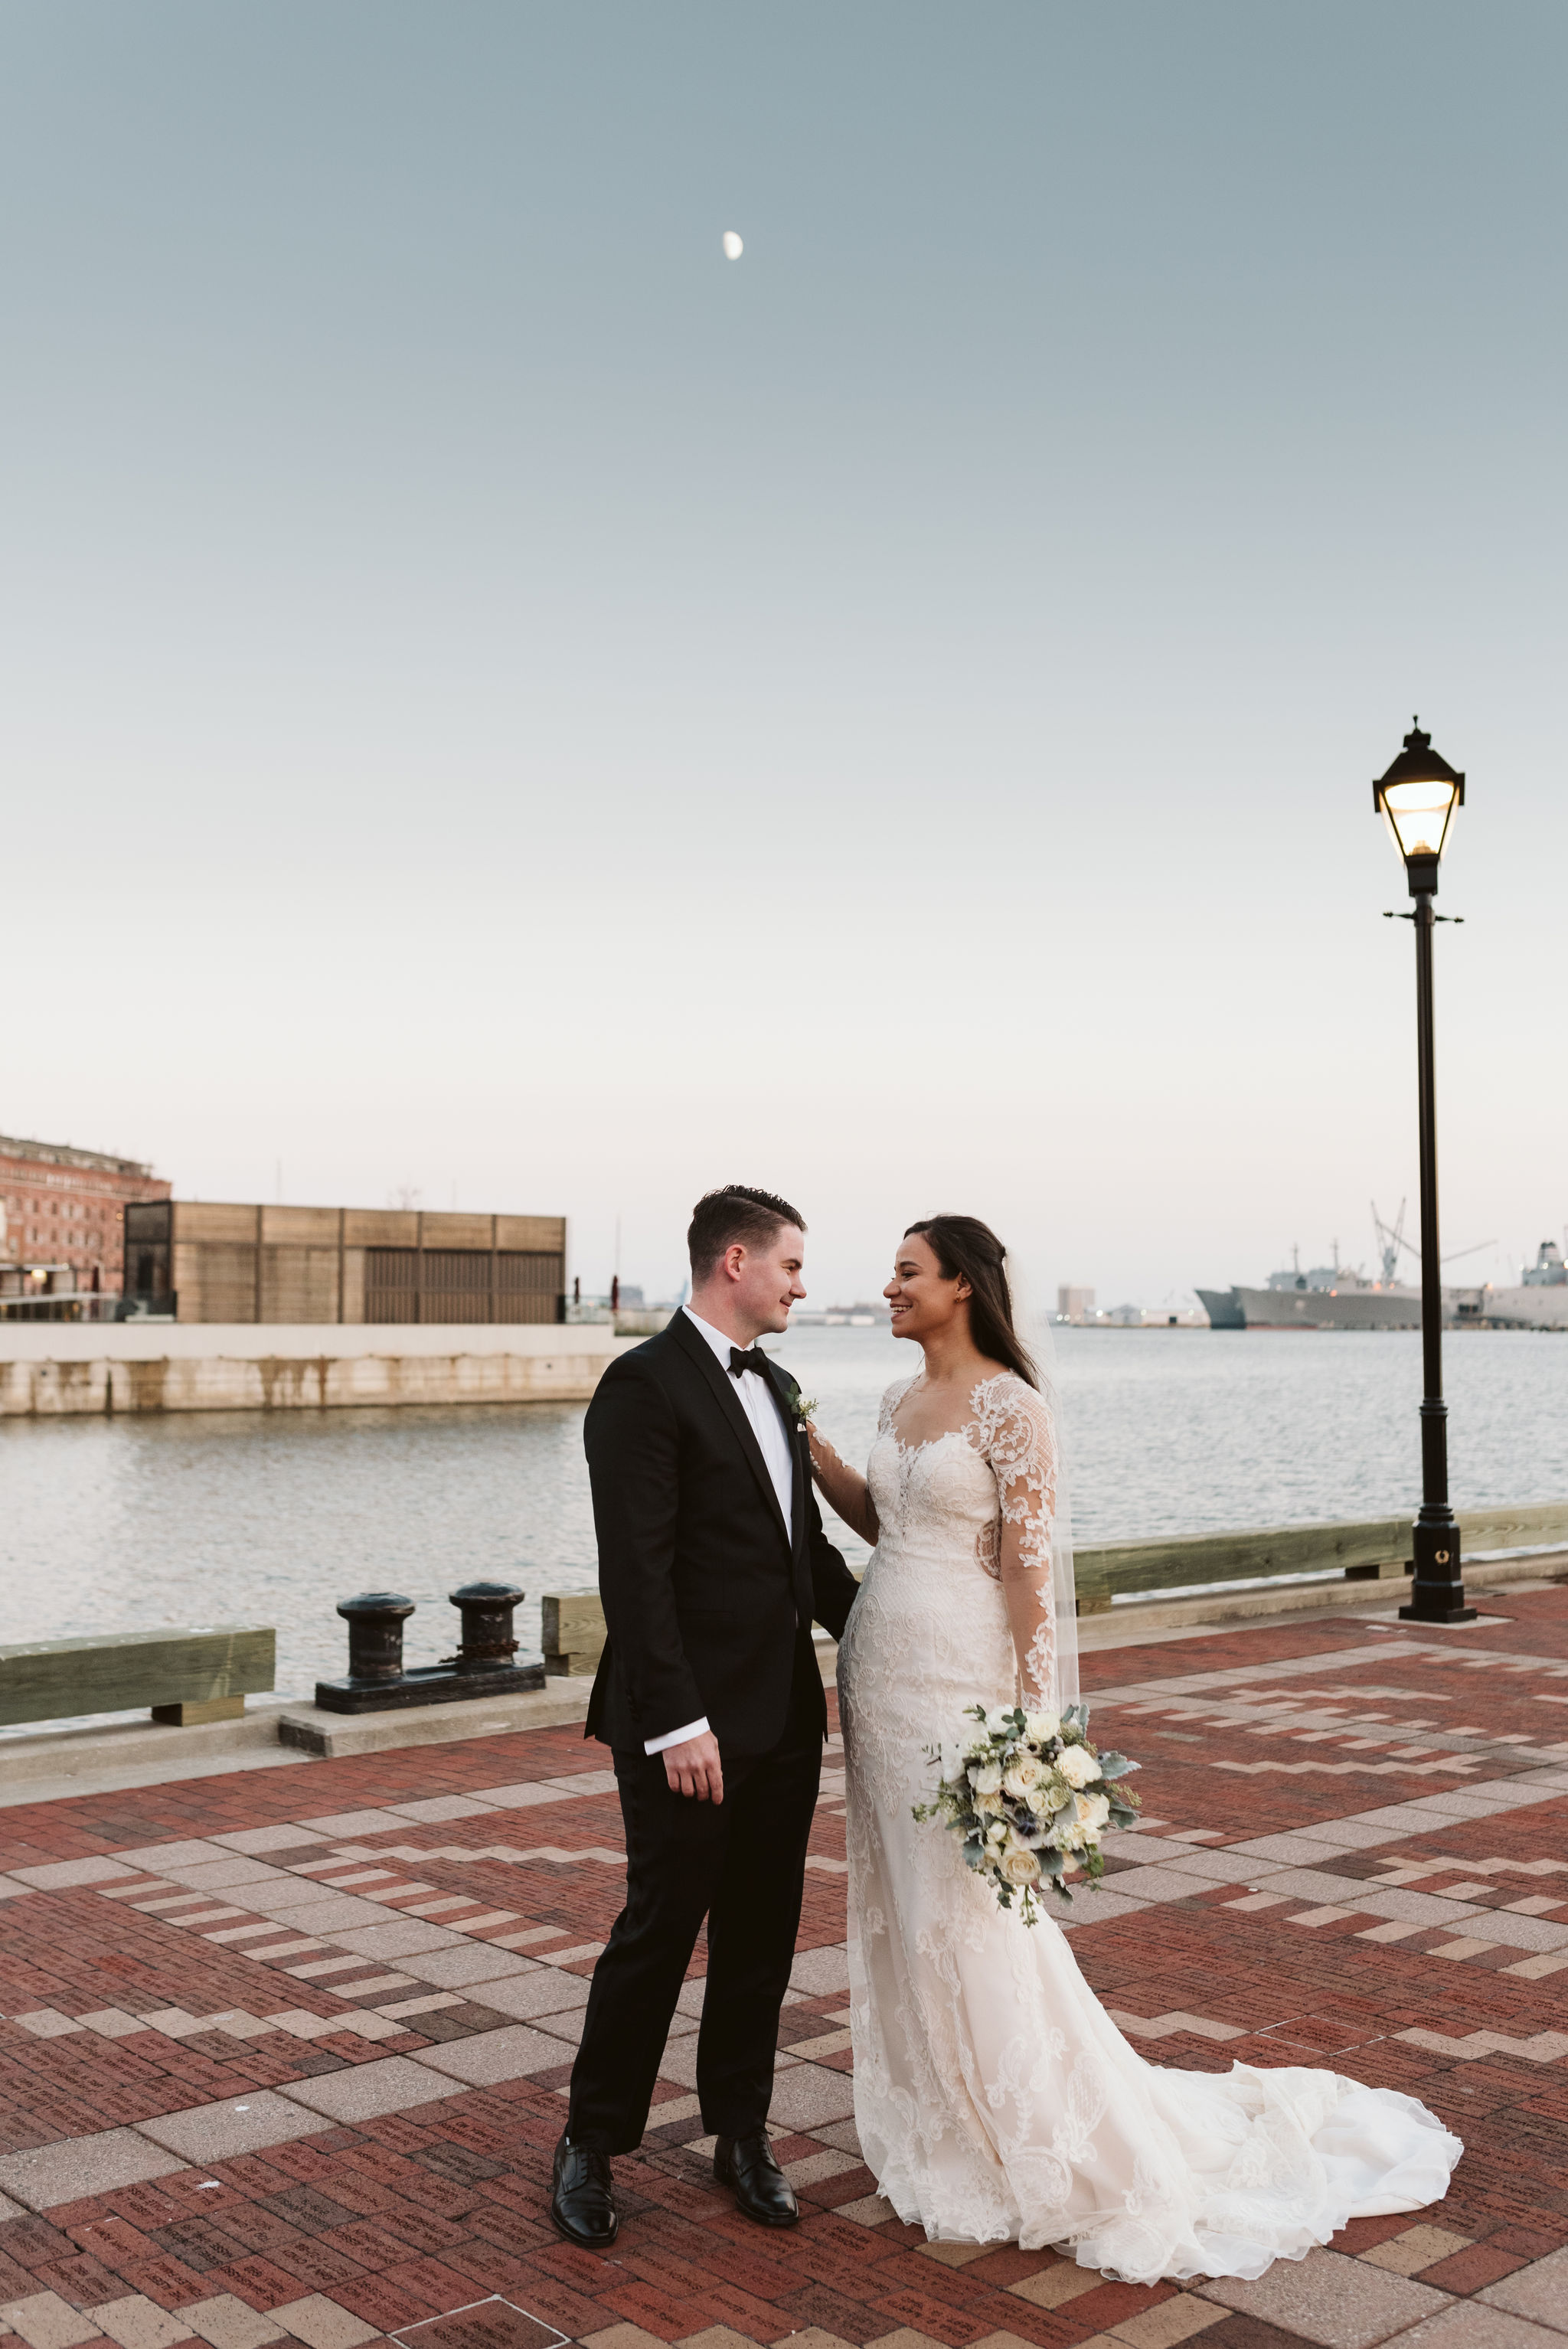  Baltimore, Fells Point, Maryland Wedding Photographer, Winter Wedding, Historic, Classic, Vintage, Bride and Groom Standing Together on Cobblestone Street, Inner Harbor, Lace Wedding Dress 